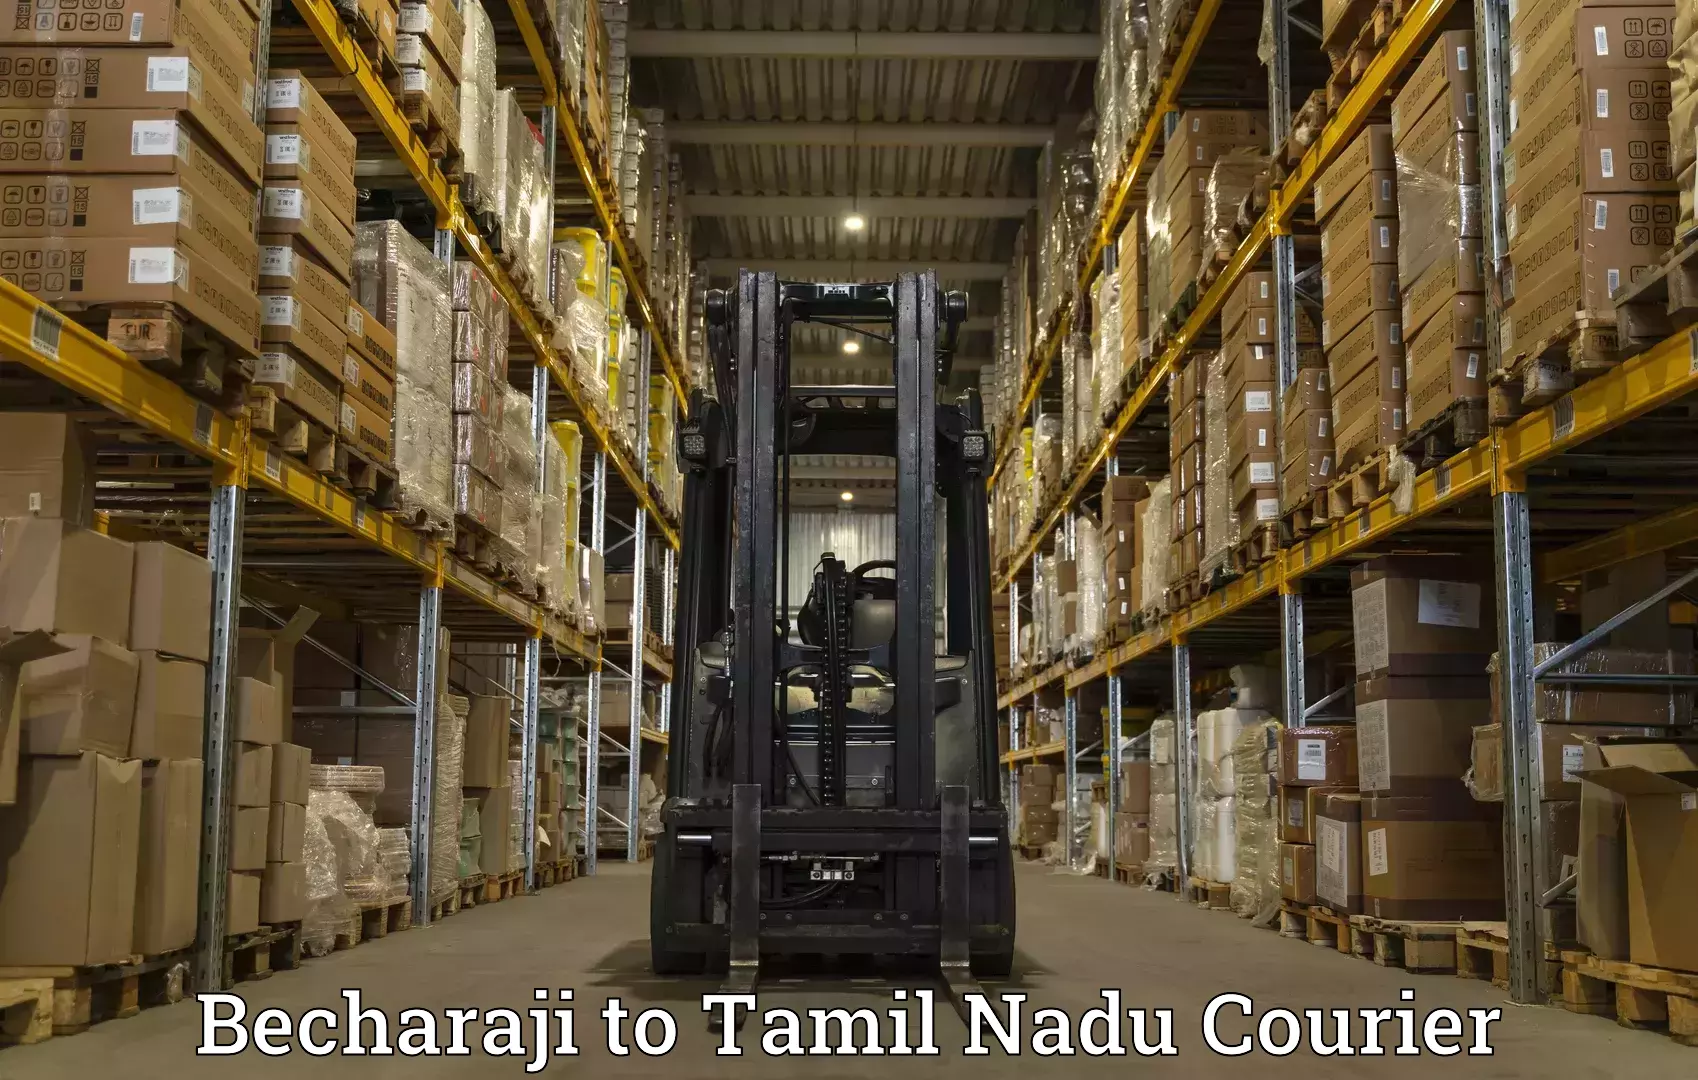 Courier tracking online Becharaji to Vellore Institute of Technology